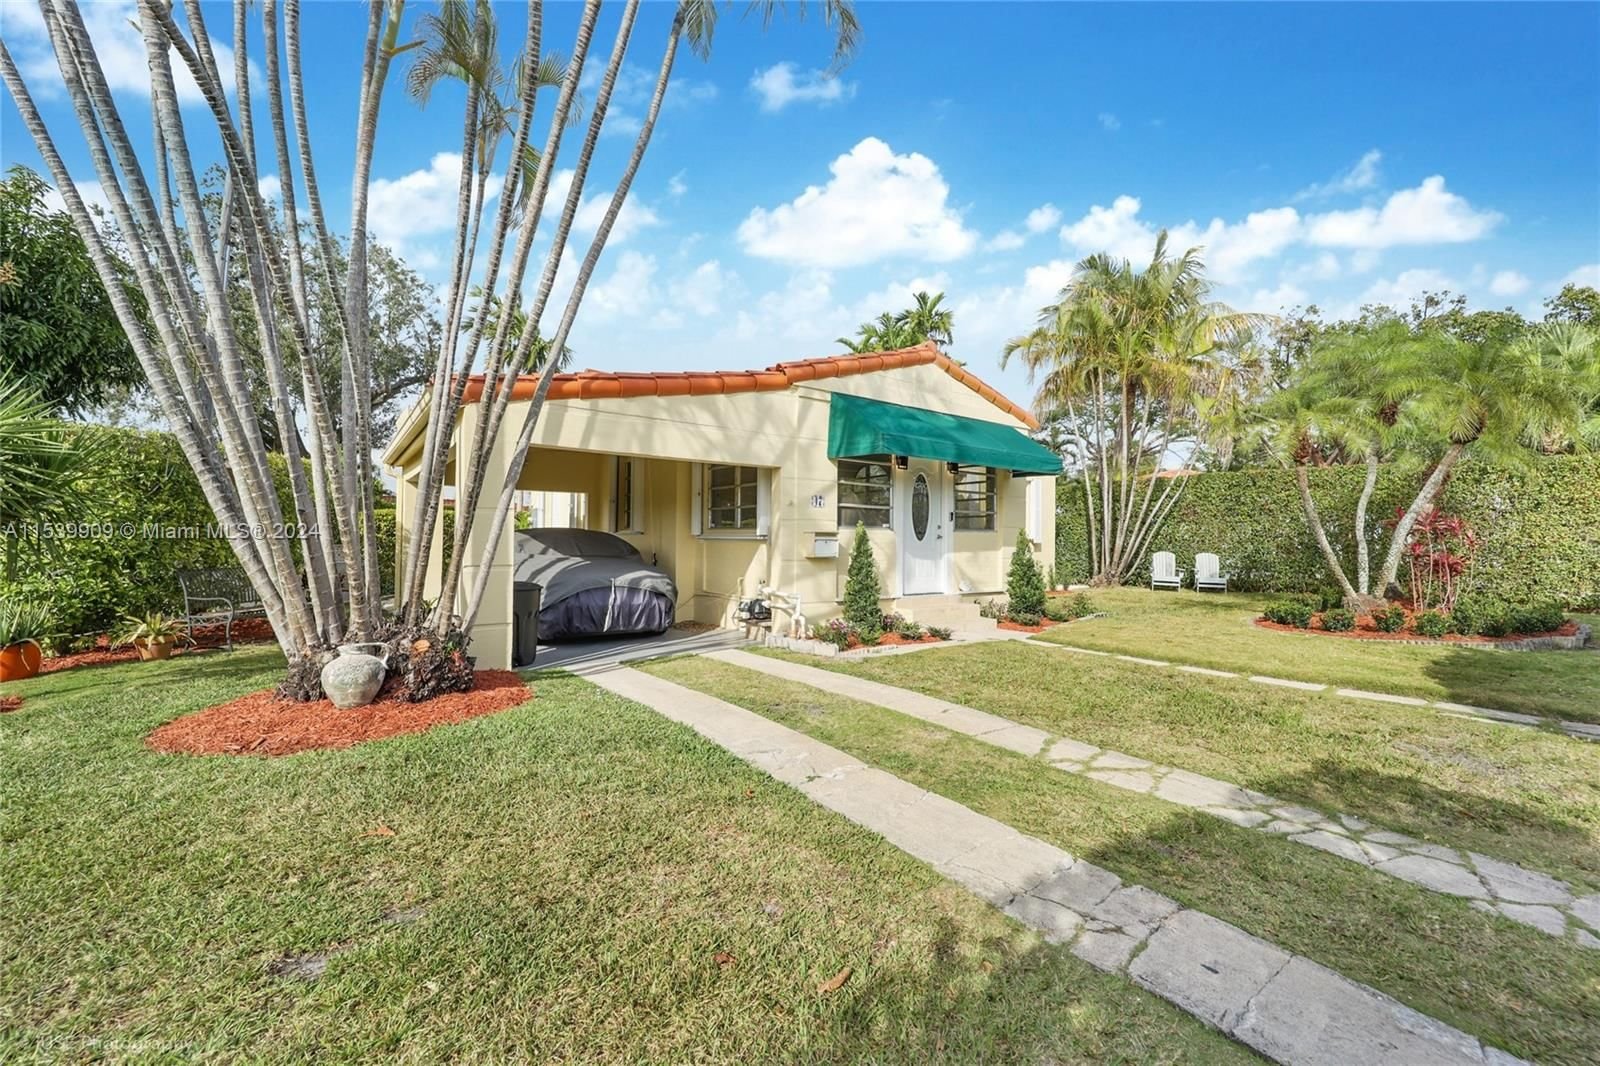 Real estate property located at 47 Fonseca Ave, Miami-Dade County, CORAL GABLES FLAGLER STRE, Coral Gables, FL